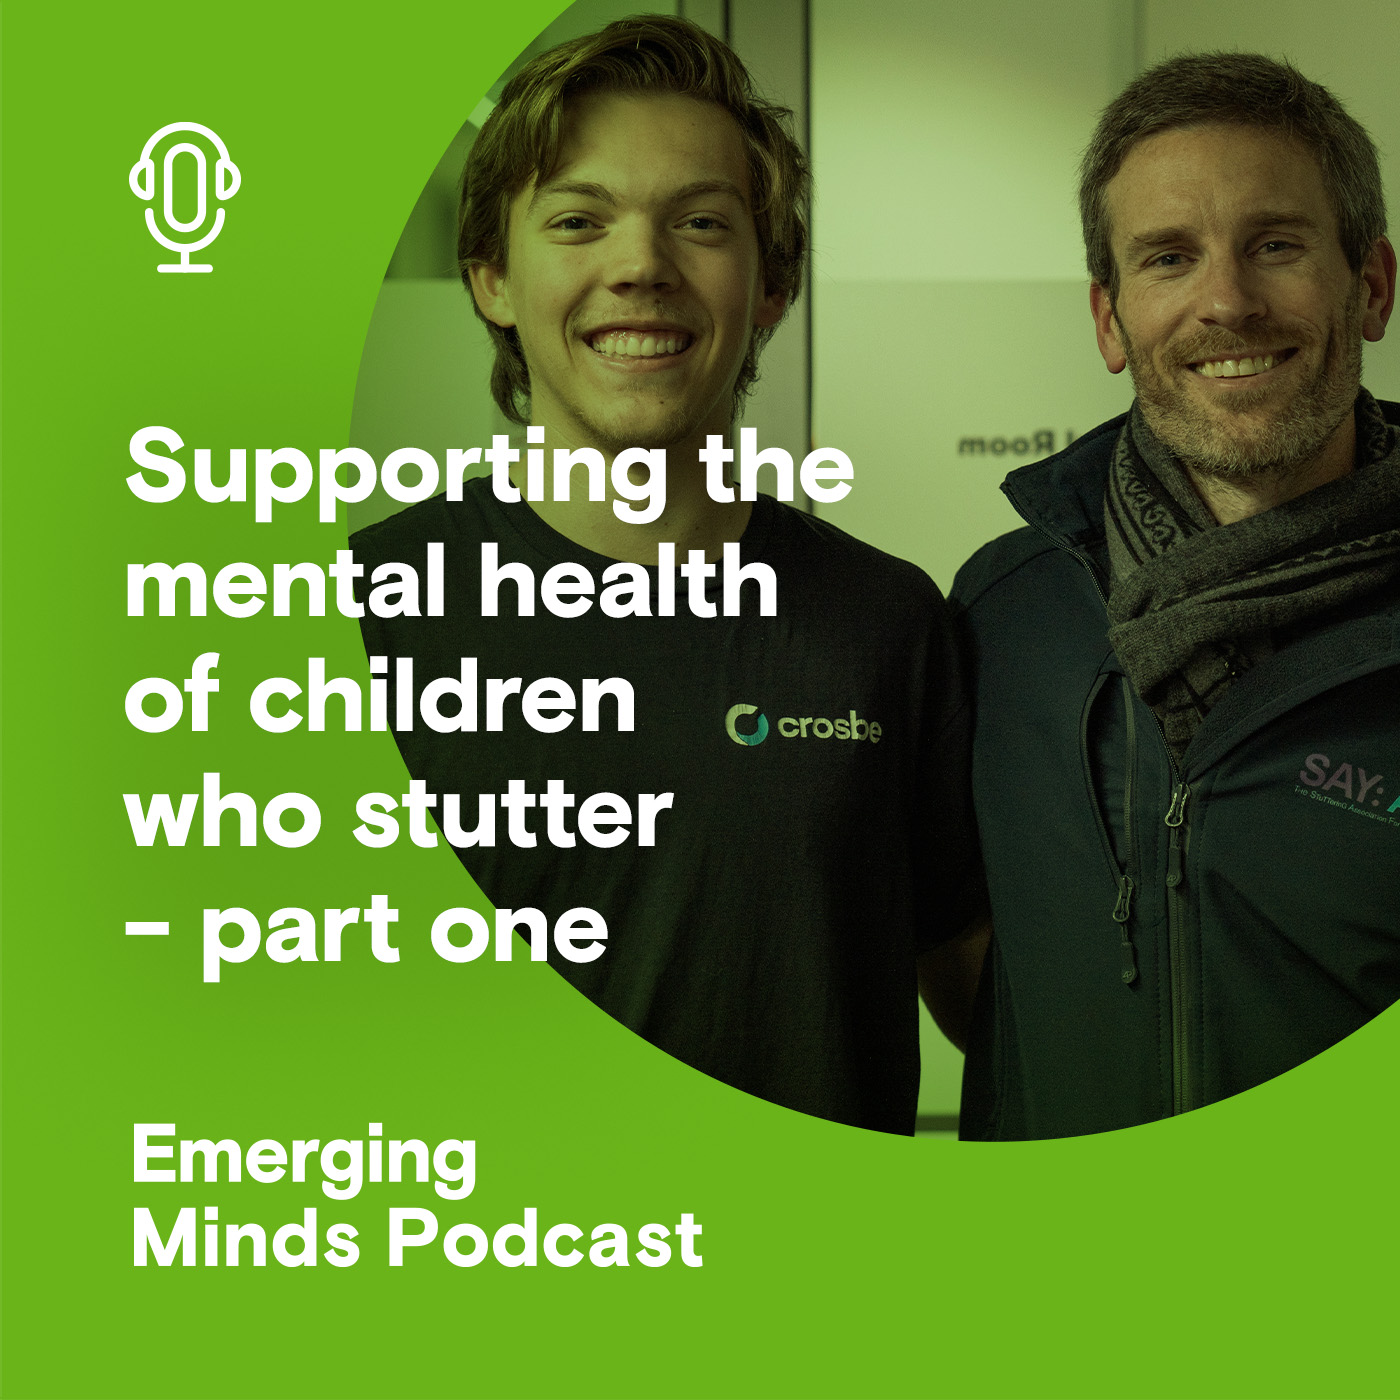 Supporting the mental health of children who stutter - part one